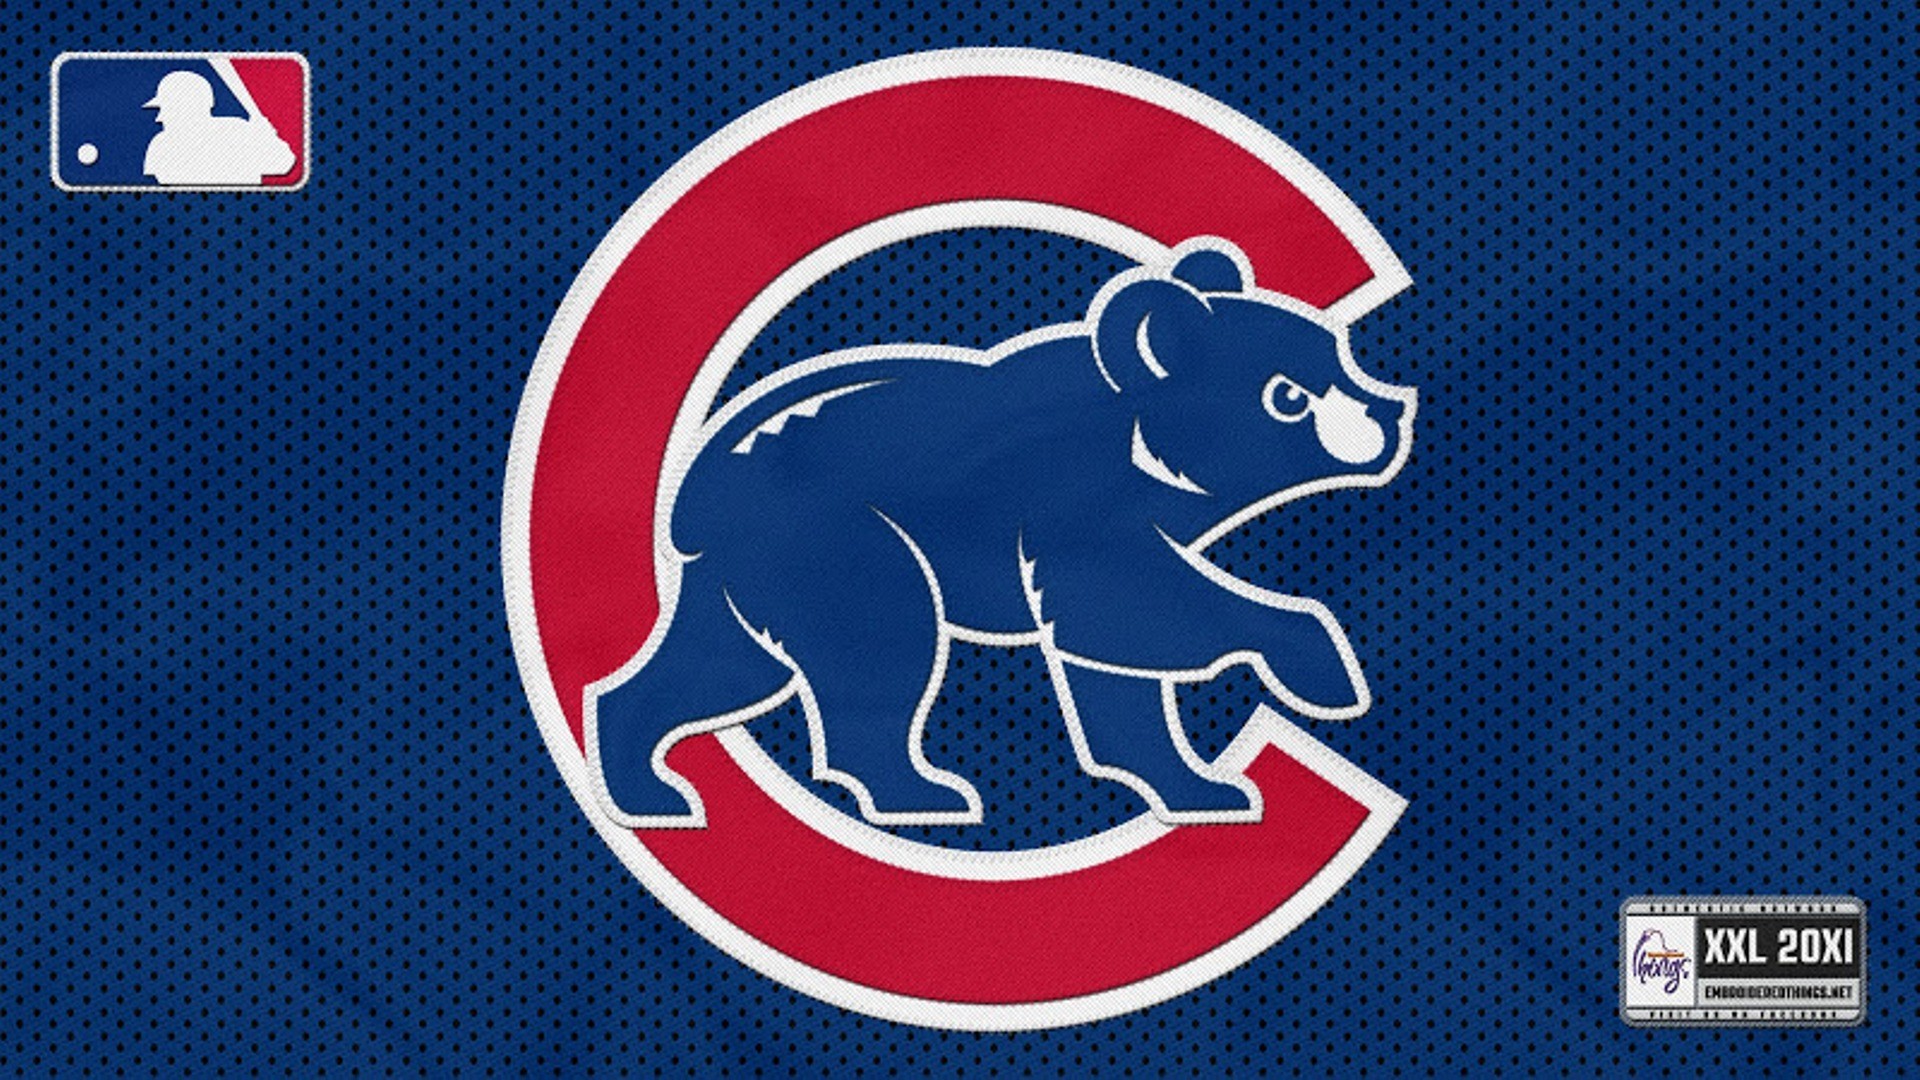 Wallpapers HD Chicago Cubs with high-resolution 1920x1080 pixel. You can use this wallpaper for Mac Desktop Wallpaper, Laptop Screensavers, Android Wallpapers, Tablet or iPhone Home Screen and another mobile phone device